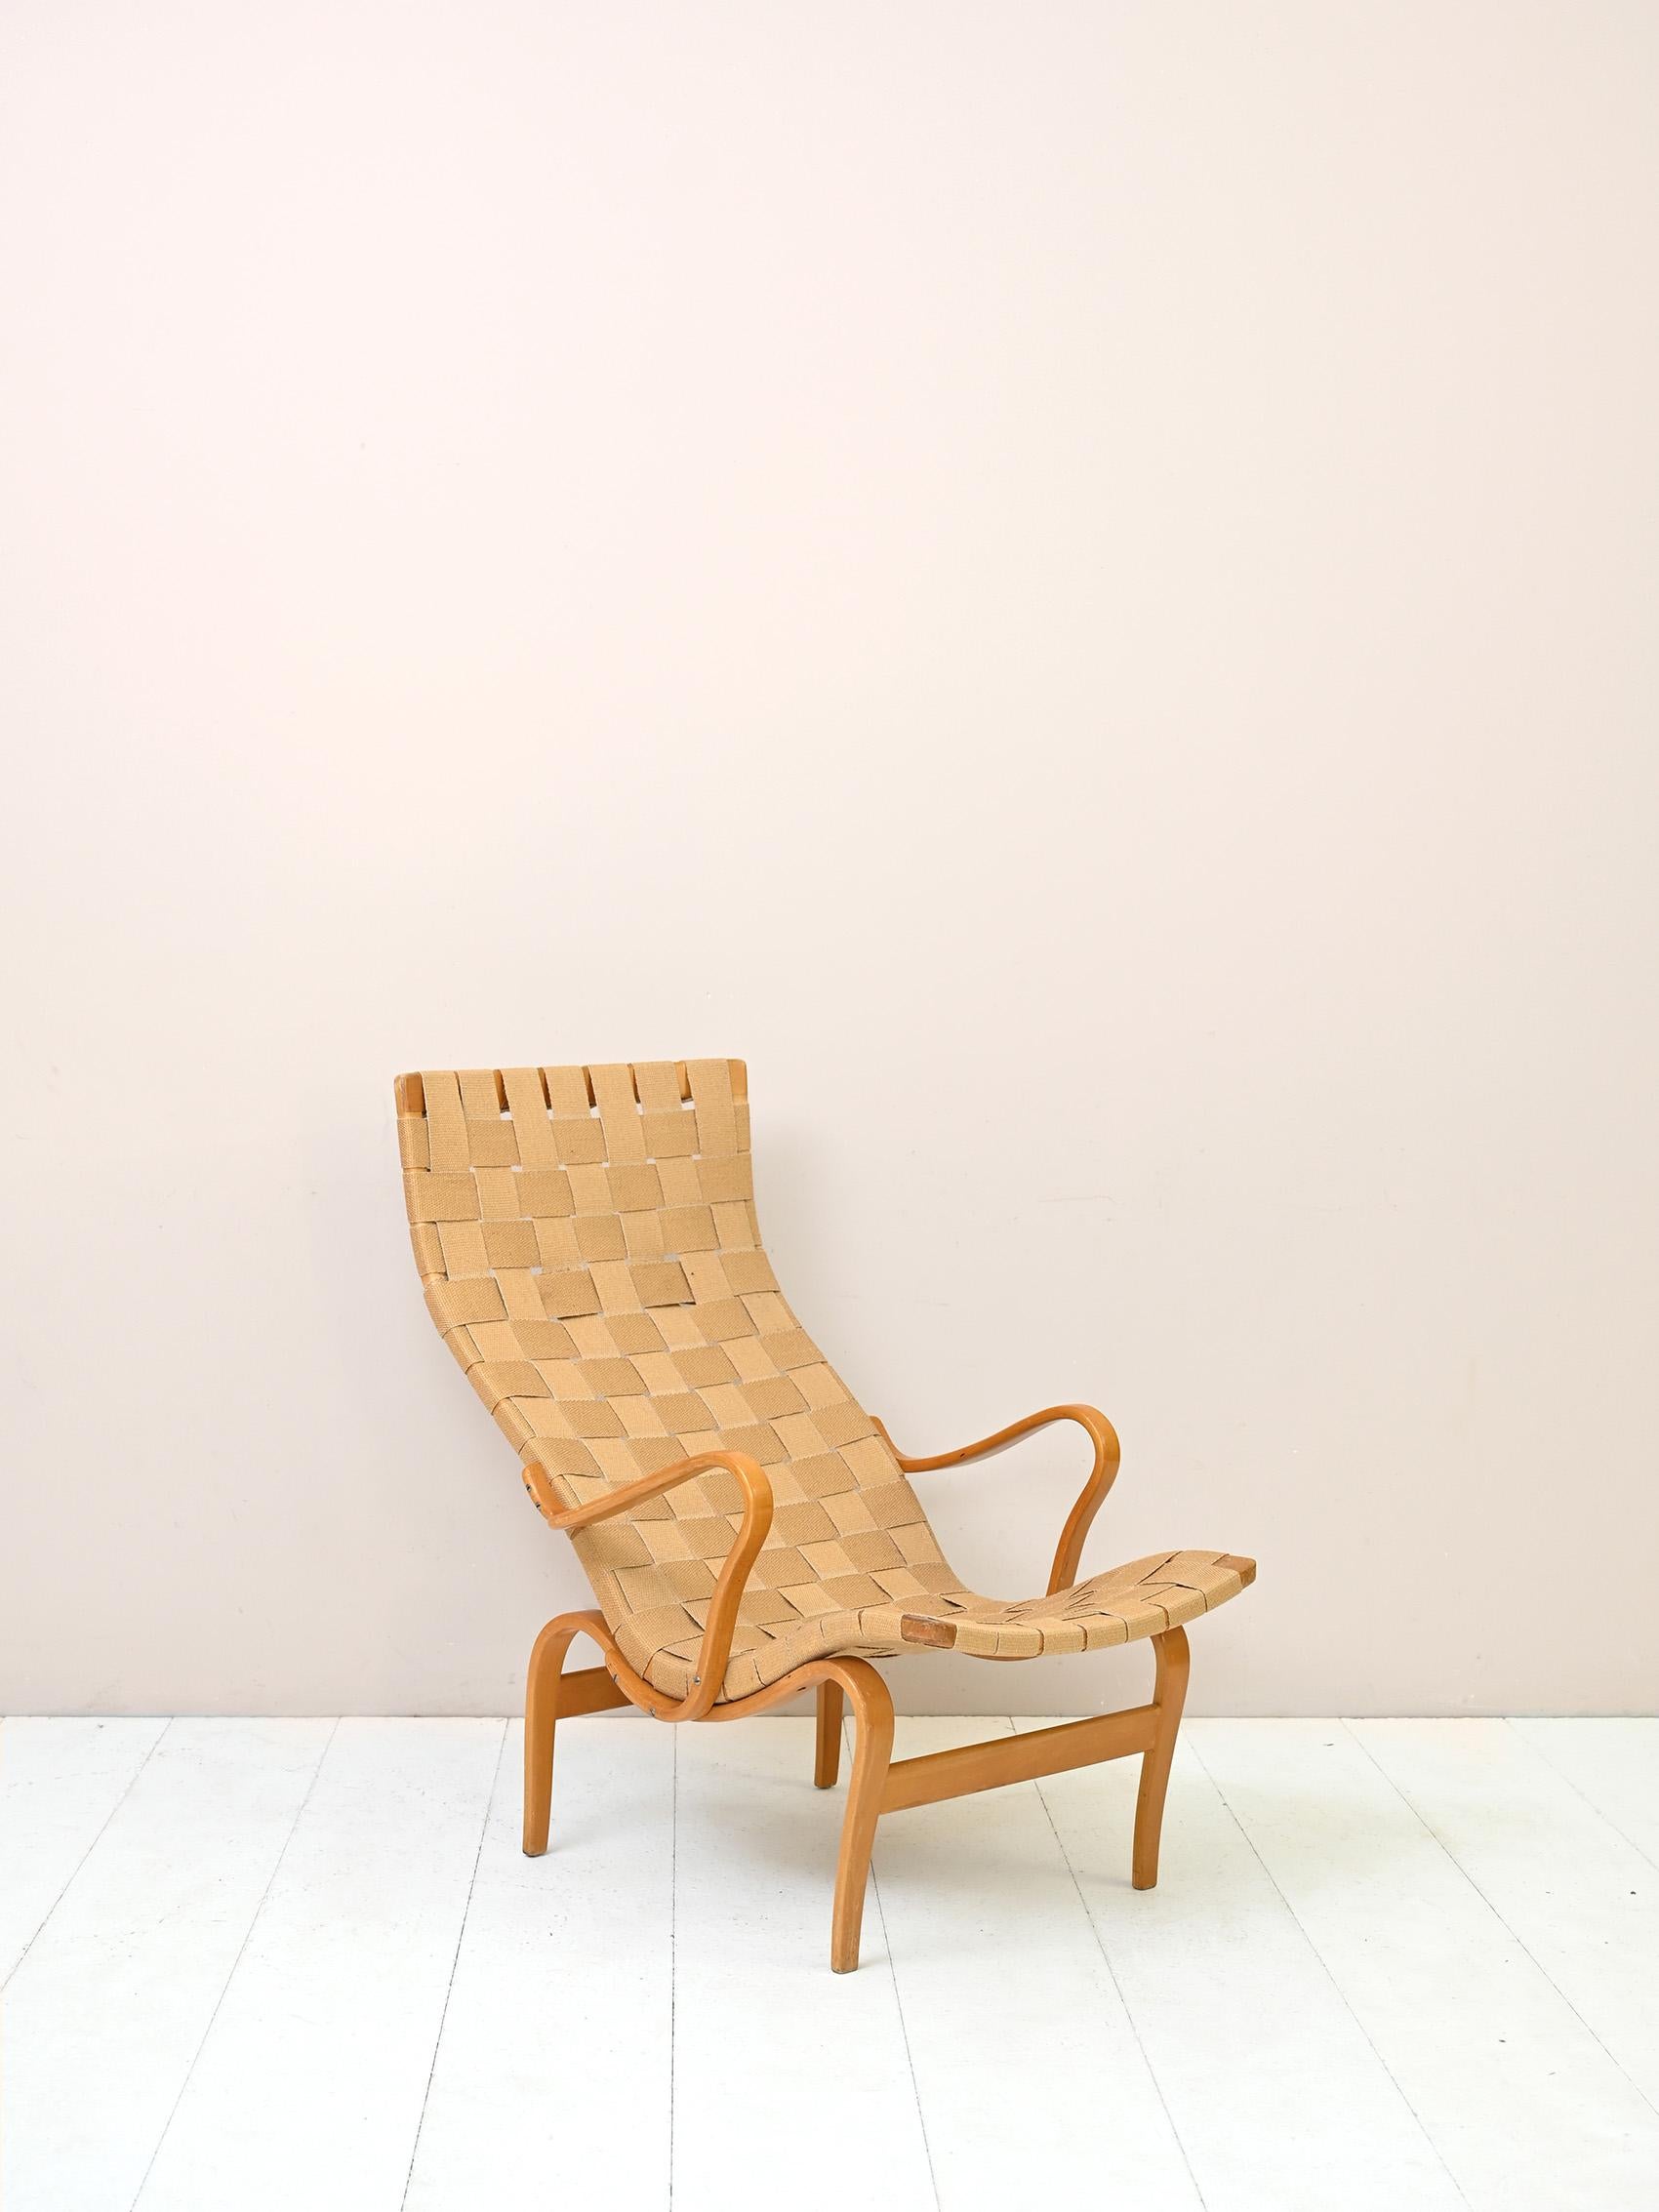 Iconic 'Pernilla' armchair designed by Bruno Mathsson for Karl Mathsson AB in Värnamo, Sweden in the 1940s.

The frame is made of birch wood and the seat of canvas with crossed straps.

Good condition. The color of the canvas of the armchair is